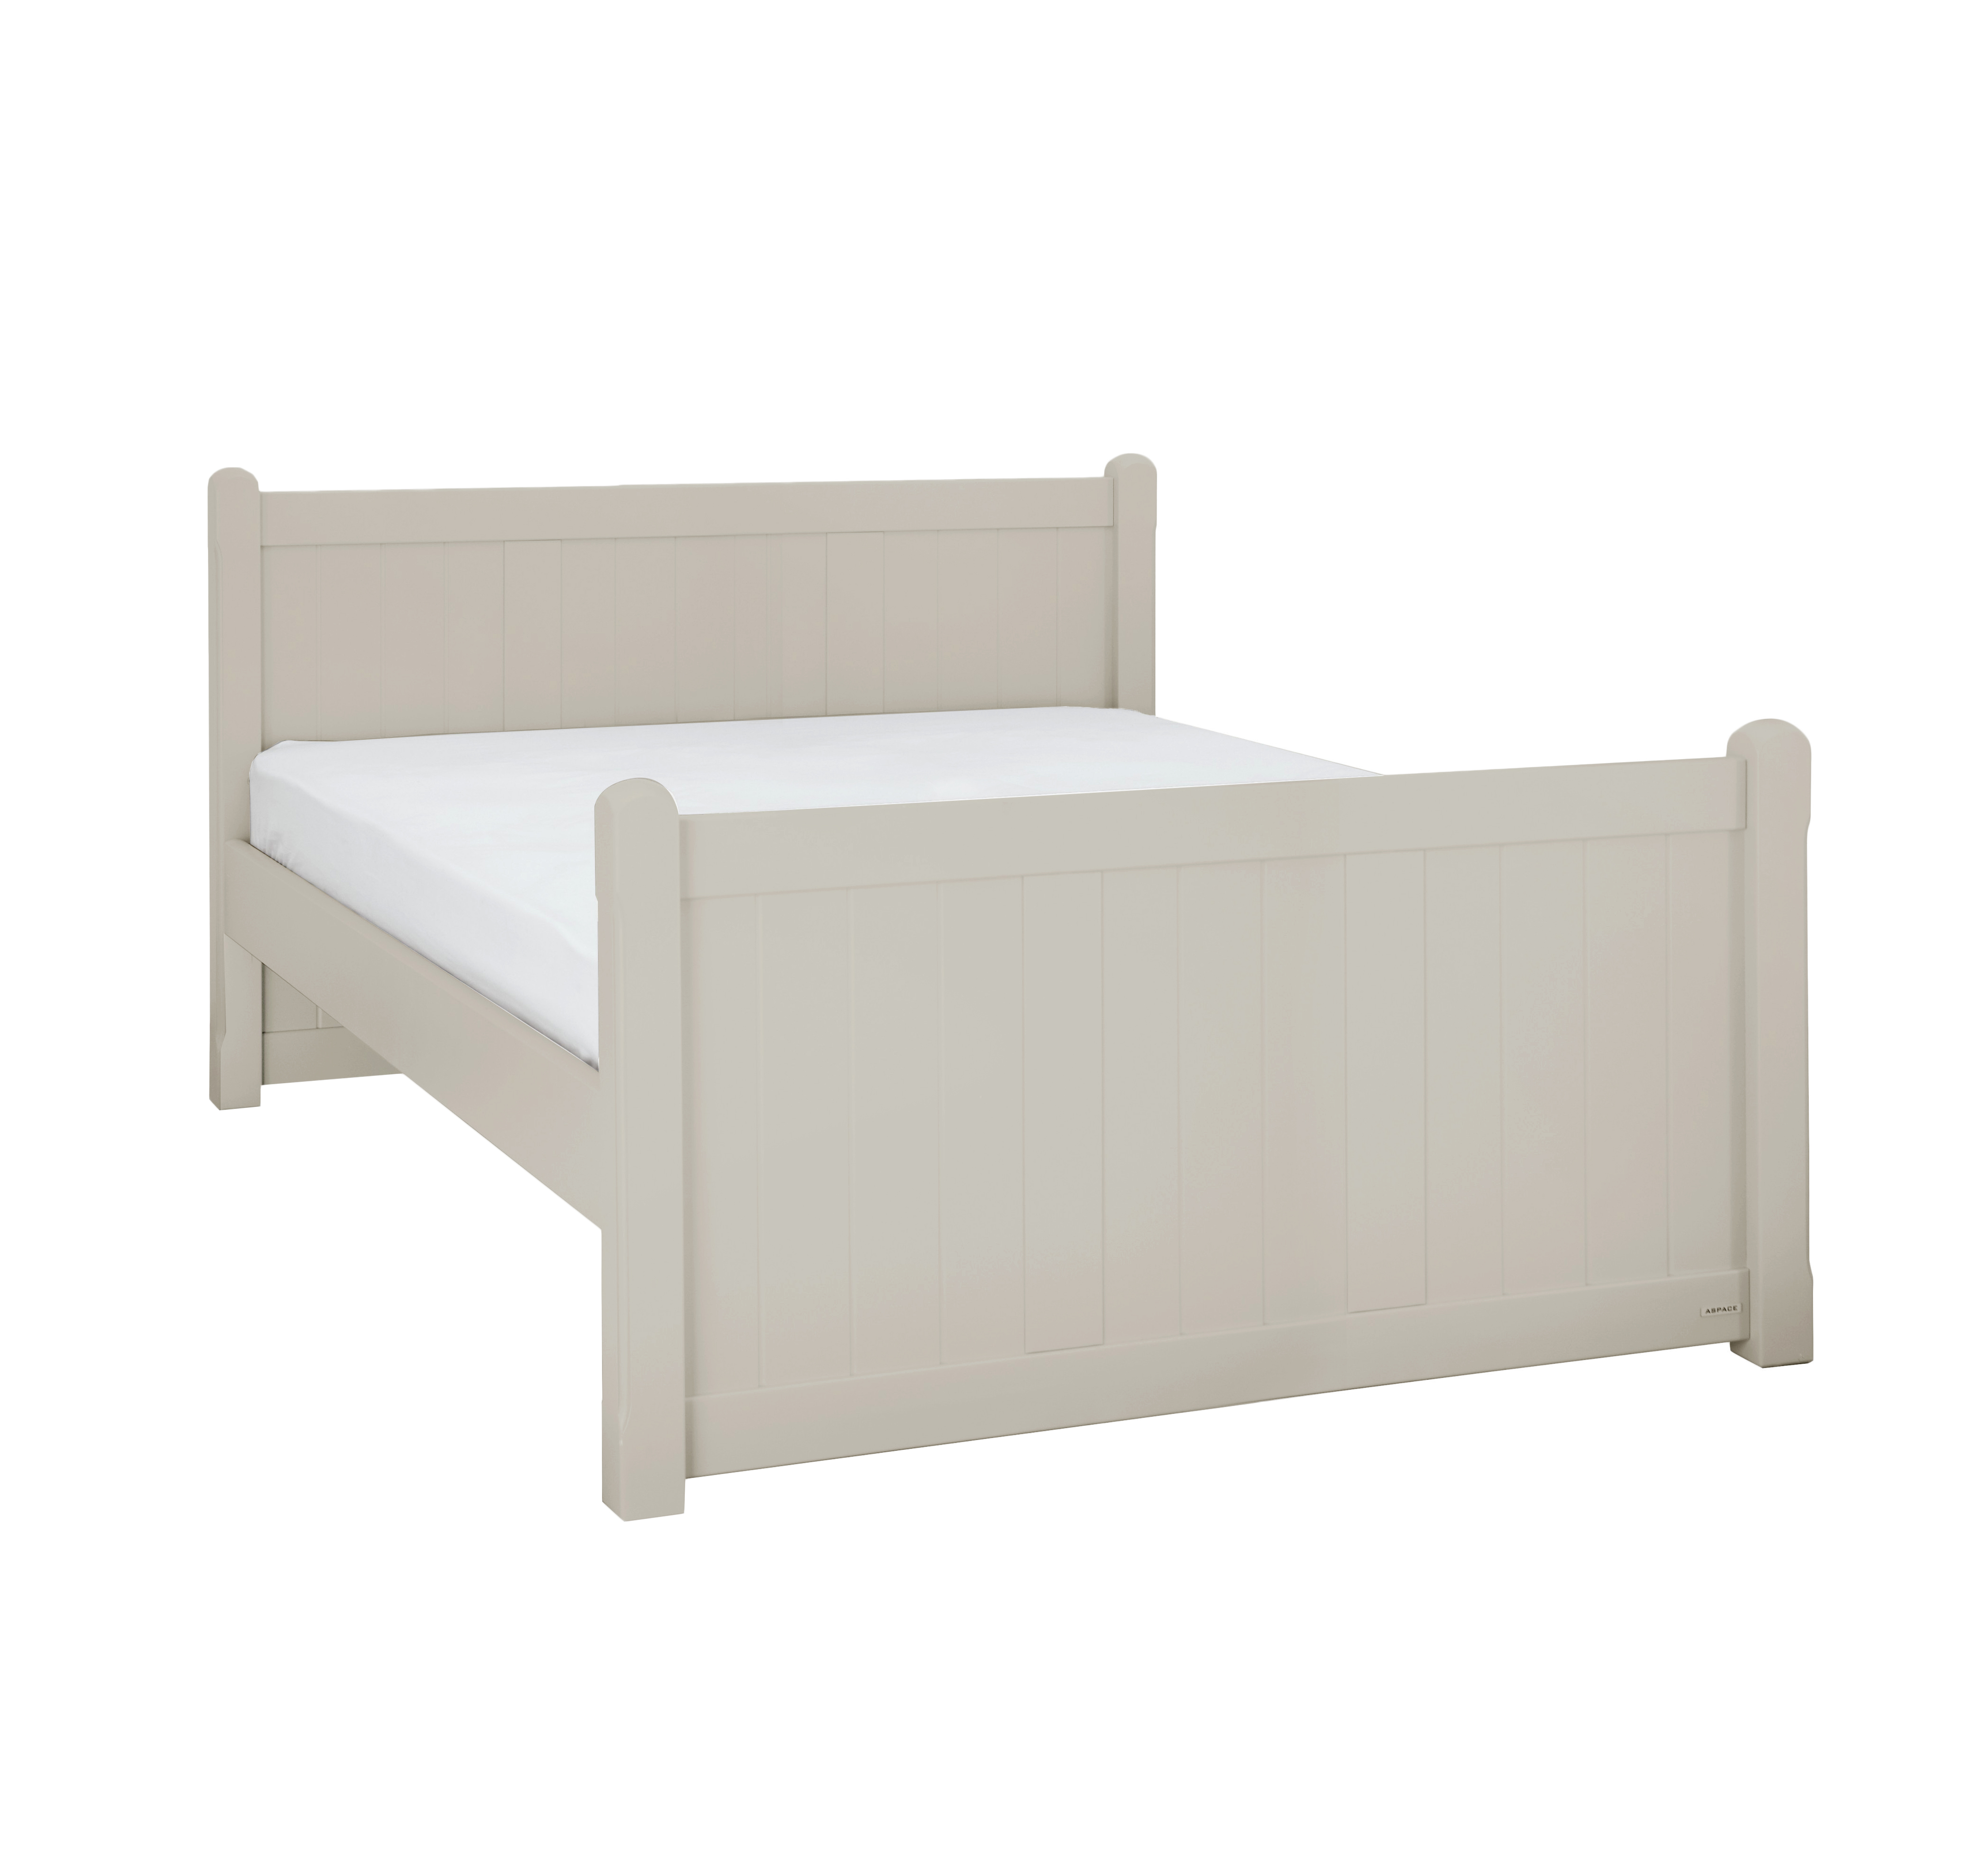 Charterhouse Children's Double Bed - Taupe